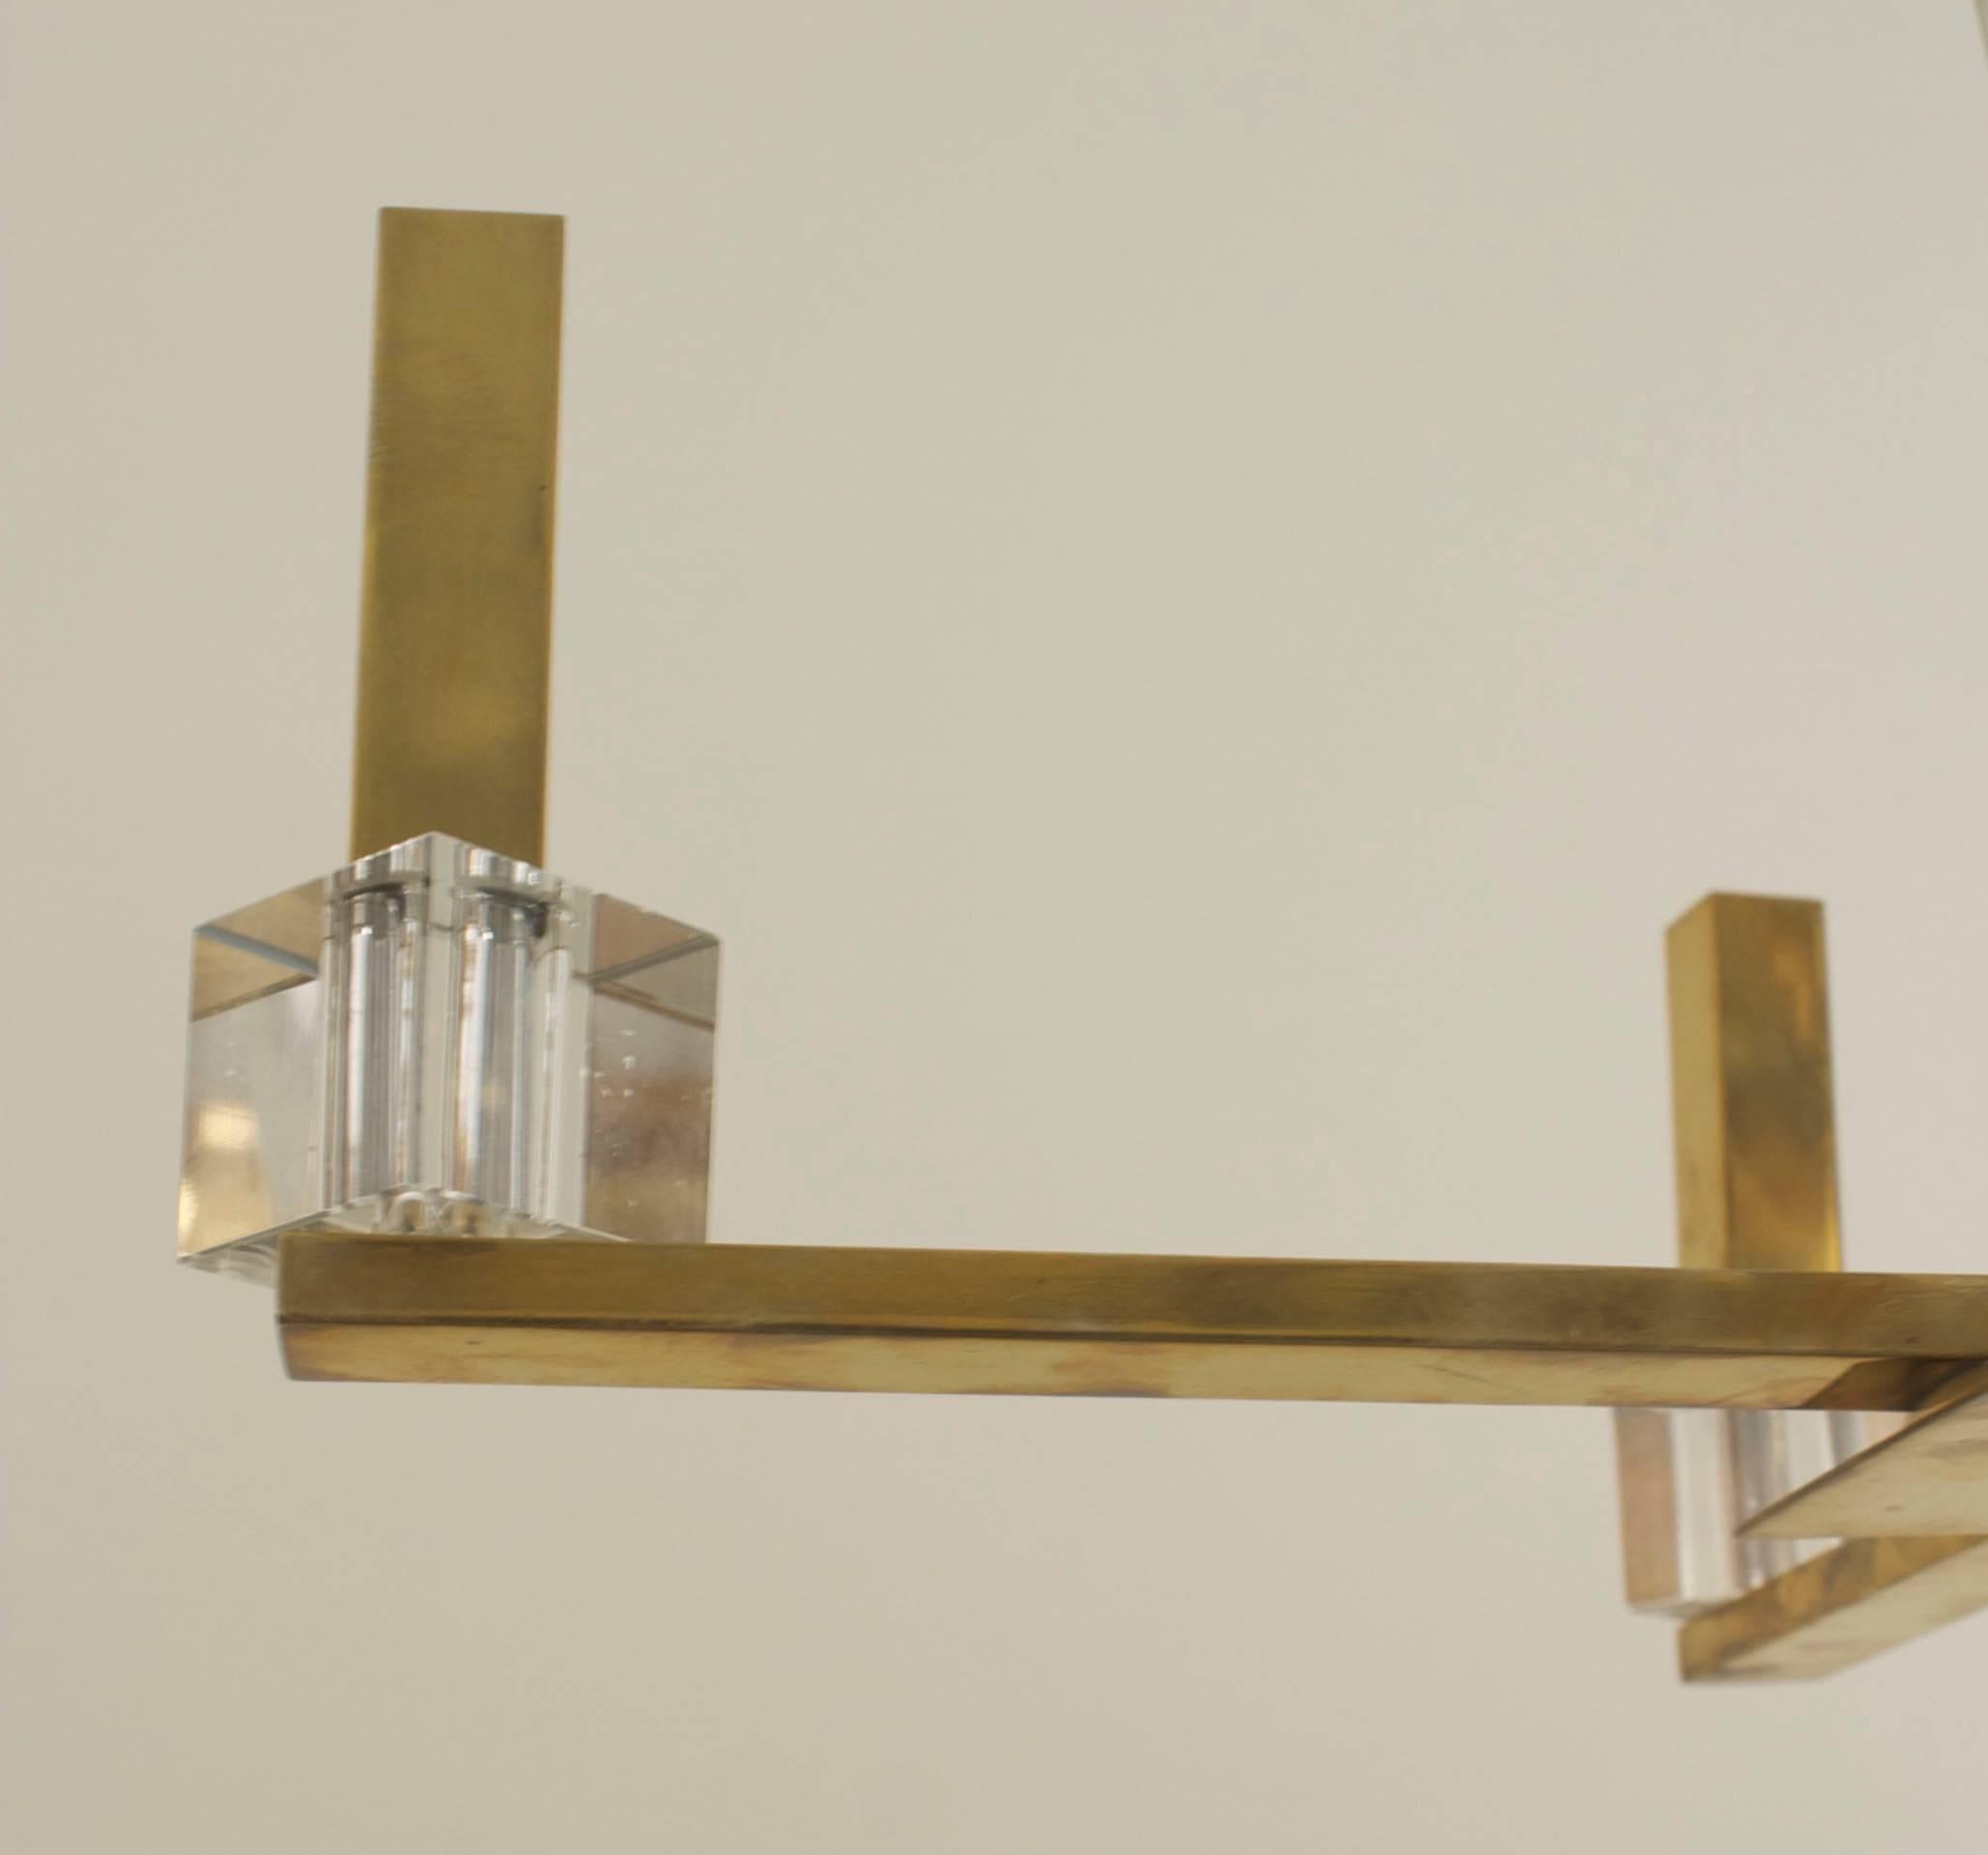 French Modernist (1940s) chandelier with 4 brass & Lucite rectangular arms emanating from a tapered square center shaft and a 3 tier round bottom with a finial.
